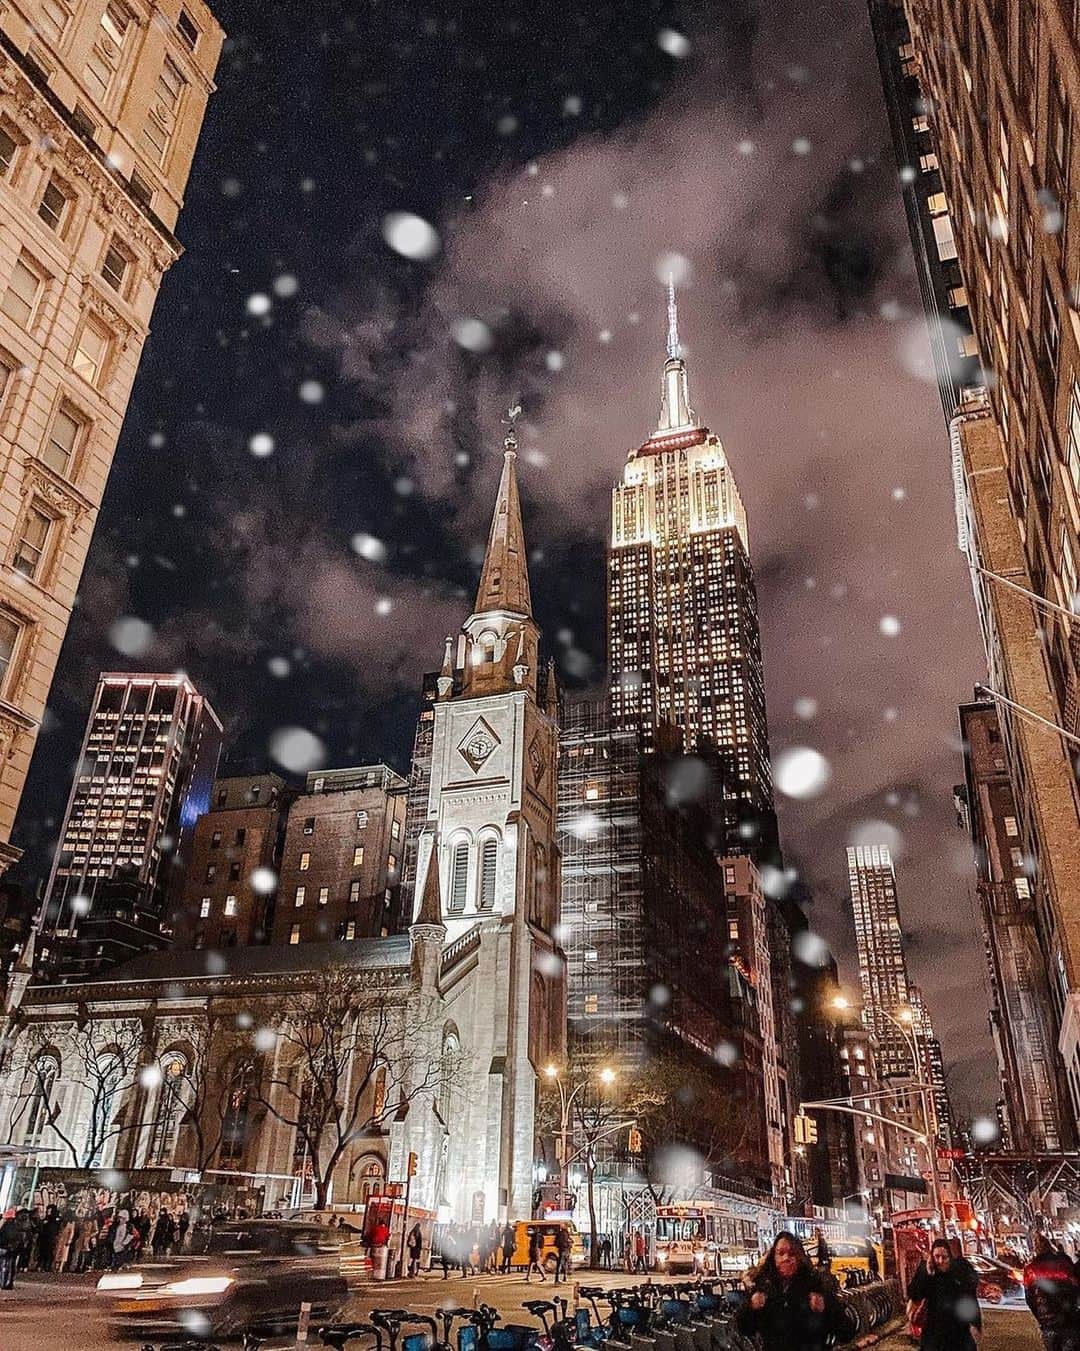 Empire State Buildingのインスタグラム：「Things to do in NYC – winter edition!  ⠀⠀⠀⠀⠀⠀⠀⠀⠀   👉 Visit the #EmpireStateBuilding (had to see that coming) 🔝  👉 Make a snowman in Central Park ☃️  👉 Drink mulled wine (or spiked hot cocoa!) on a heated rooftop 🍷  👉 Walk to Times Square during a snowstorm (it gets super quiet & peaceful!) ❄️  ⠀⠀⠀⠀⠀⠀⠀⠀⠀   Comment below if you’ve got any recommendations for #thingstodoinnyc!  ⠀⠀⠀⠀⠀⠀⠀⠀⠀   📷: @Littlesomethingaboutus」